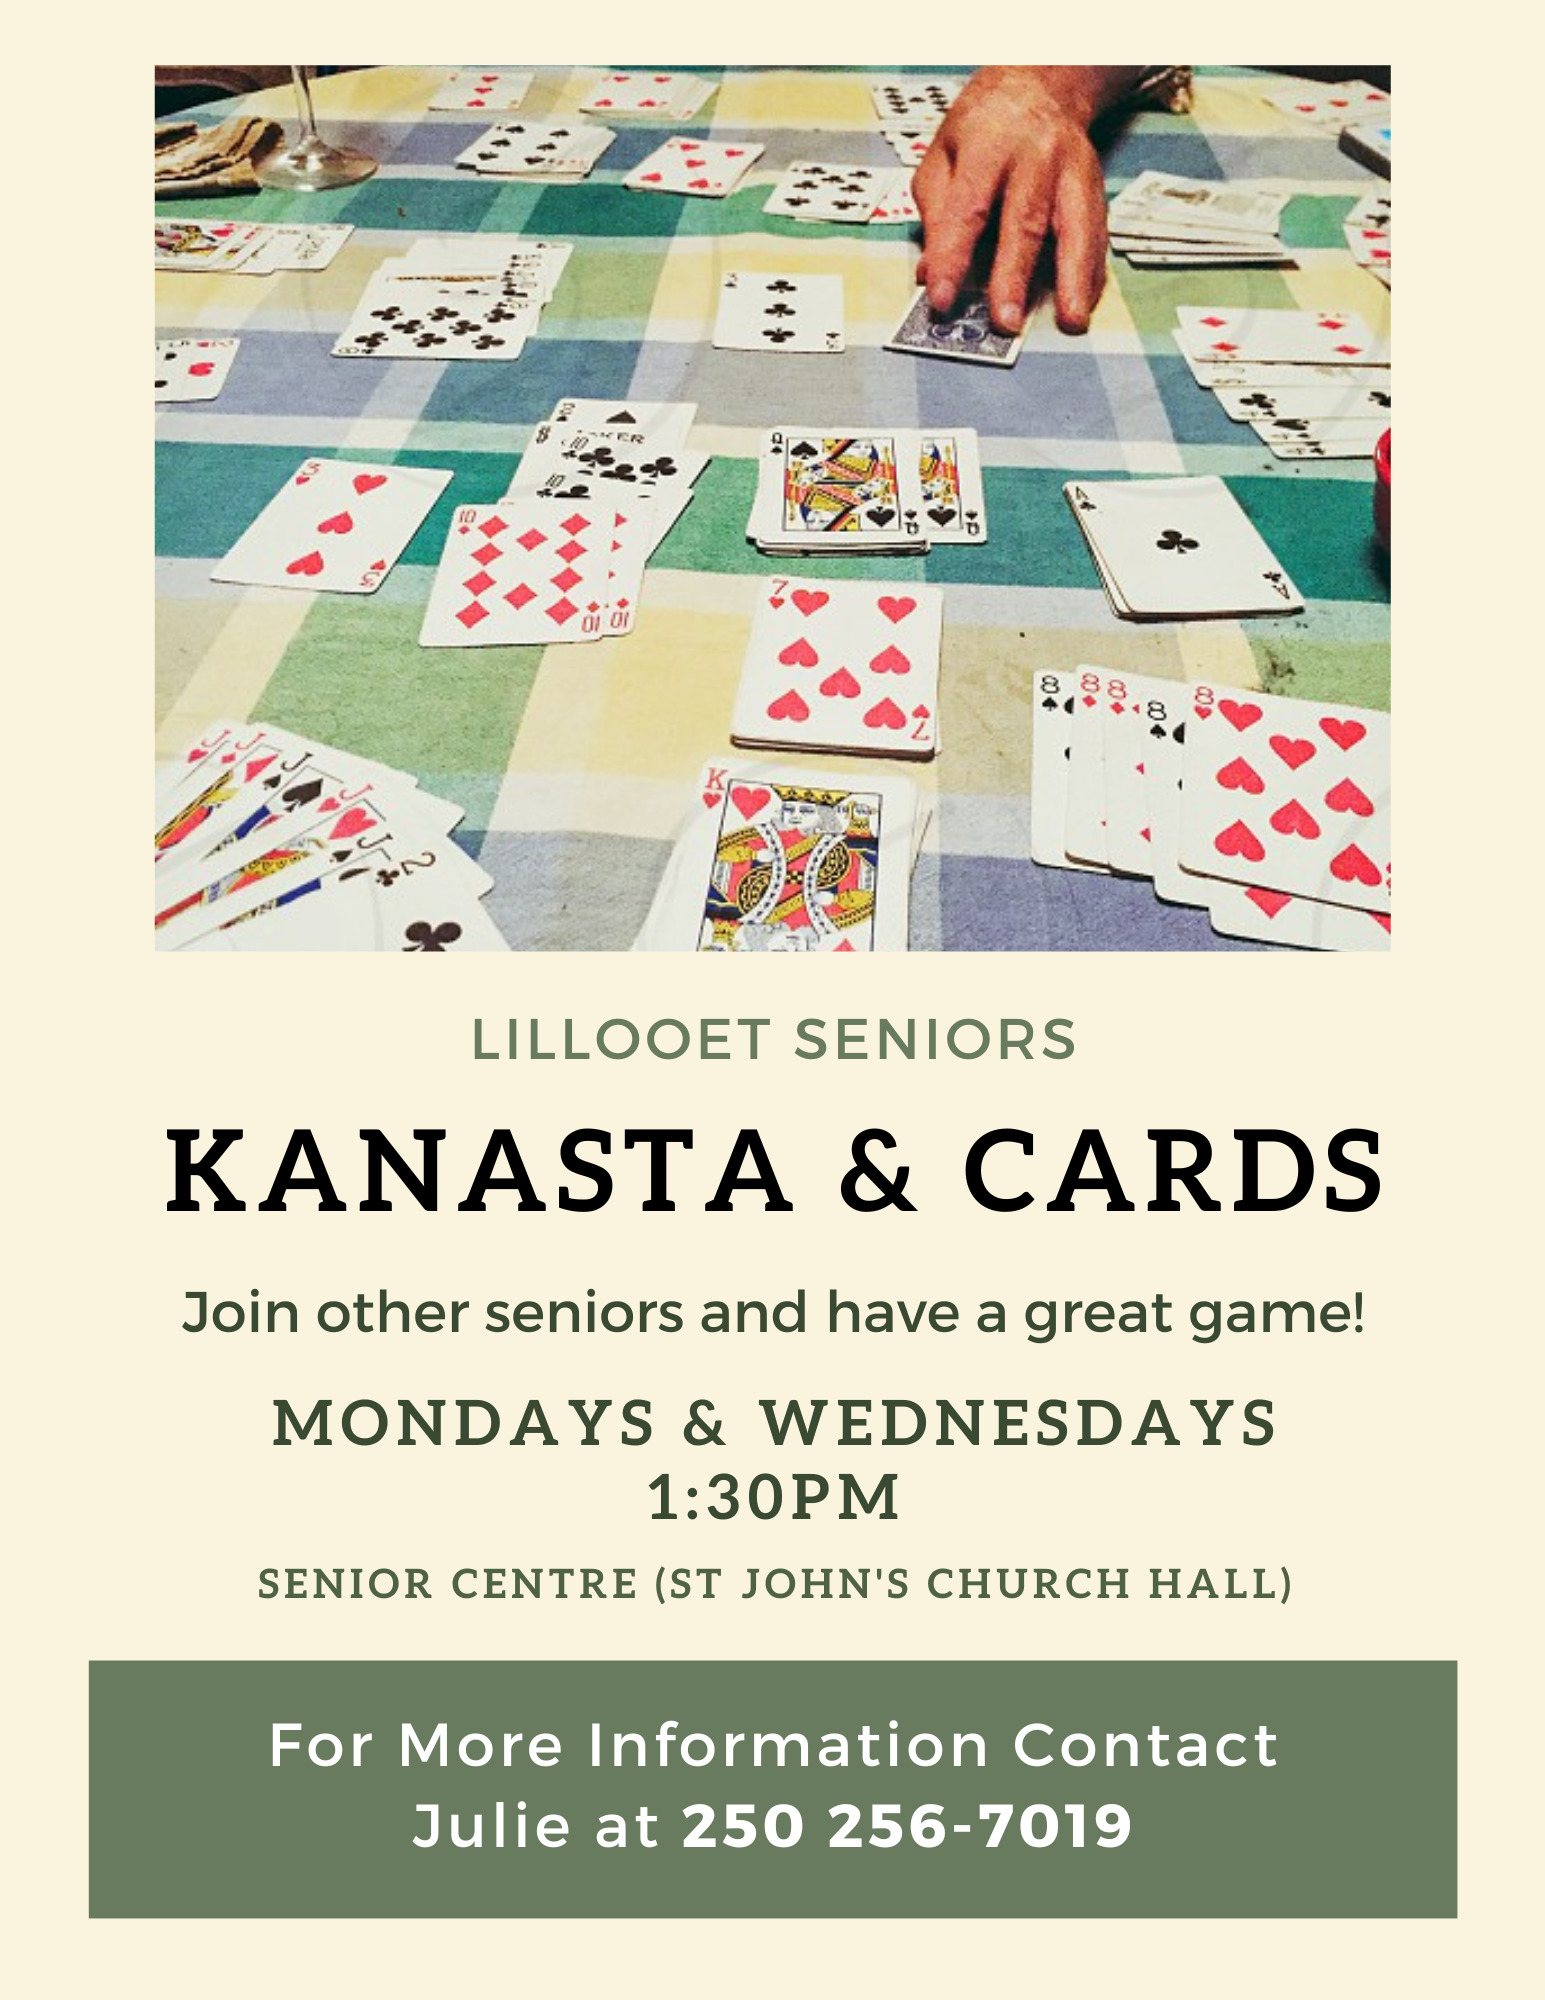 Poster for kanasta and cards for seniors every tuesday